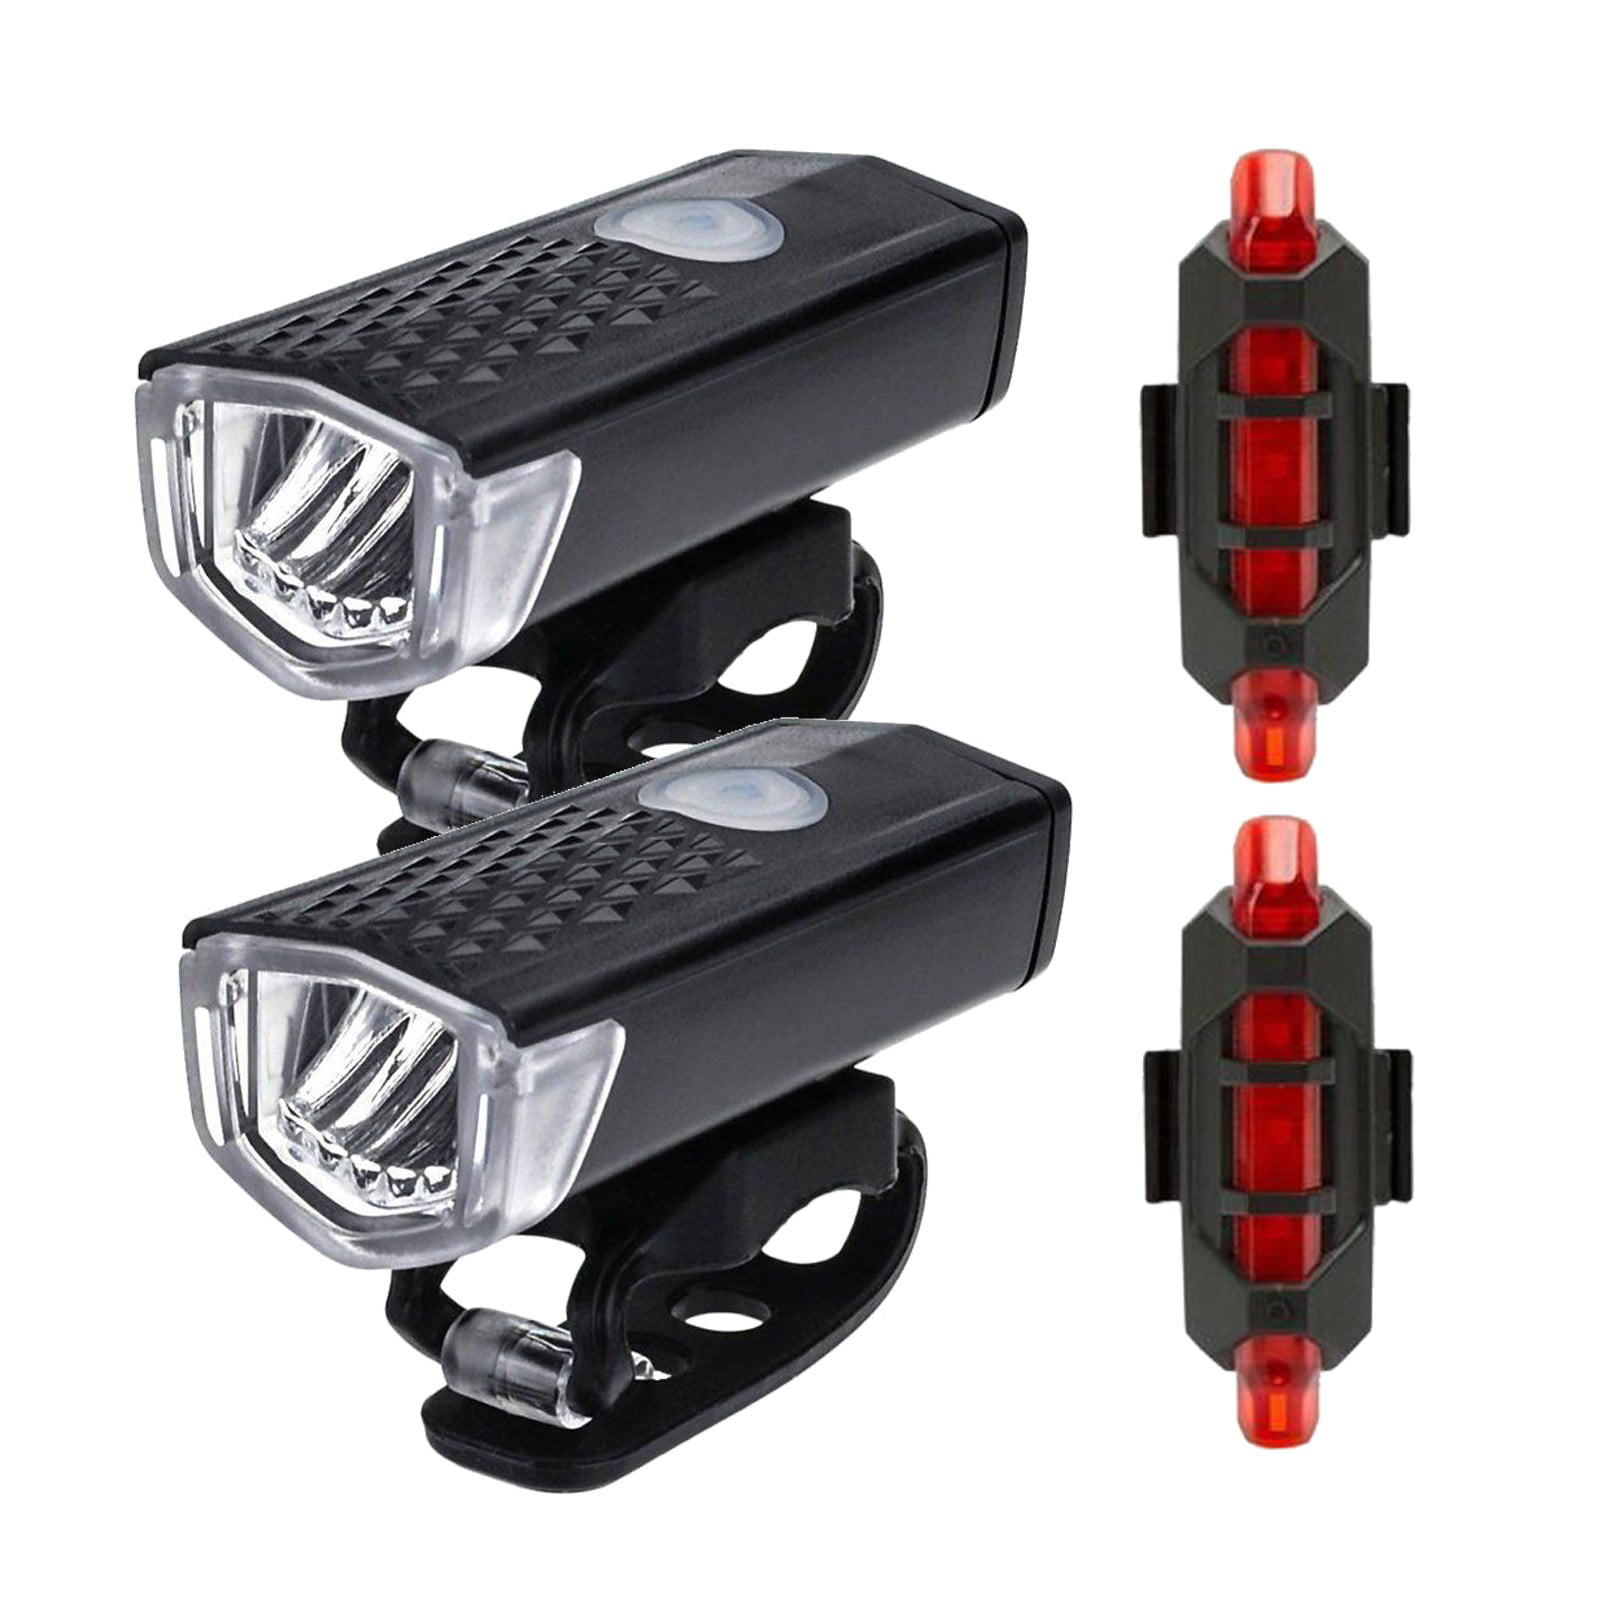 Bike Bicycle Cycling Headlight USB Rechargeable LED Front Light Tail Rear Lamp 